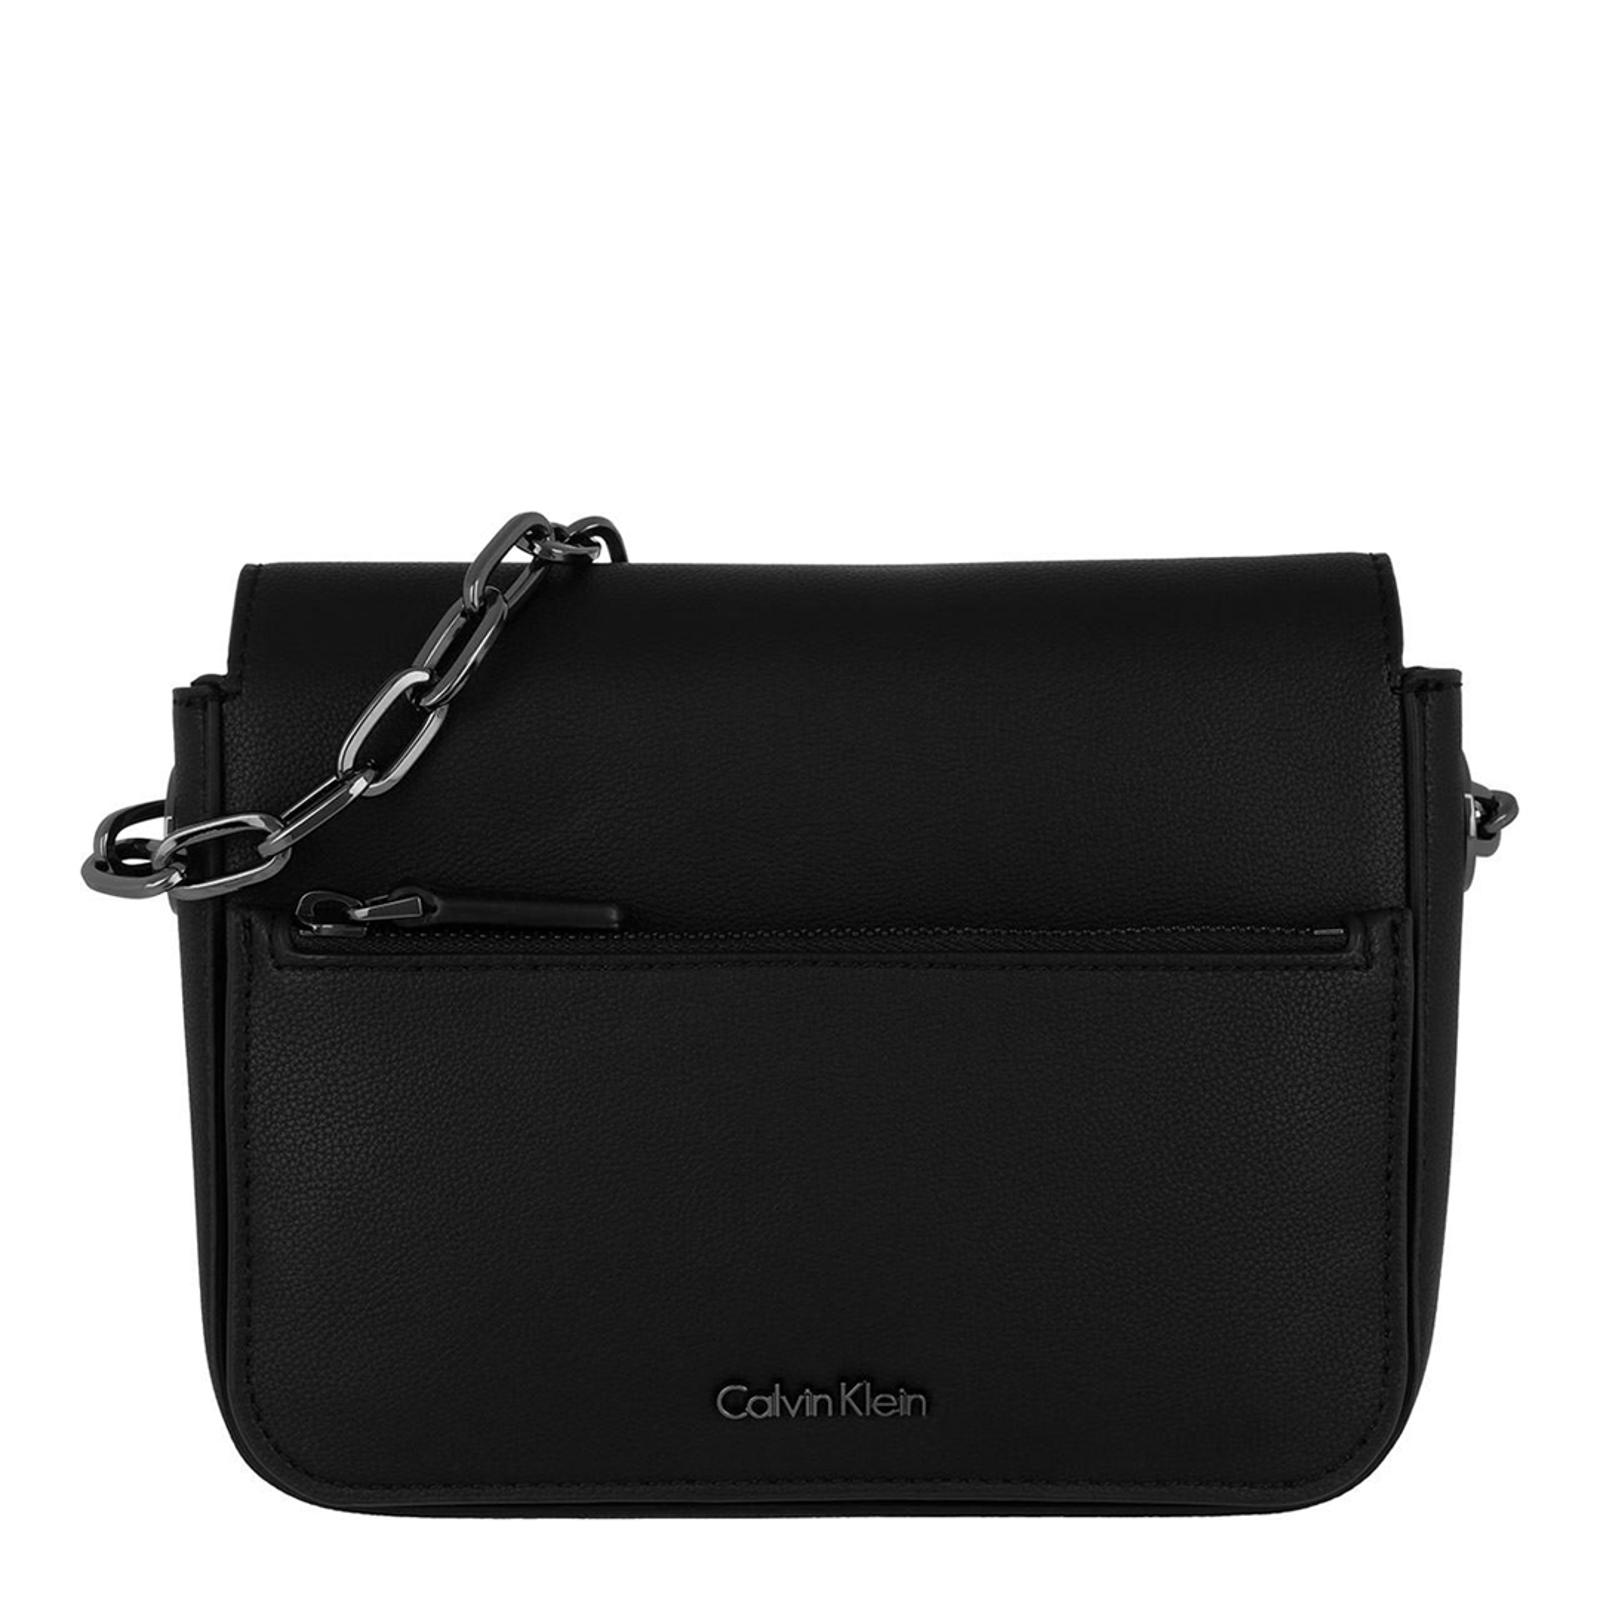 Black Night Out Small Shoulder Bag - BrandAlley